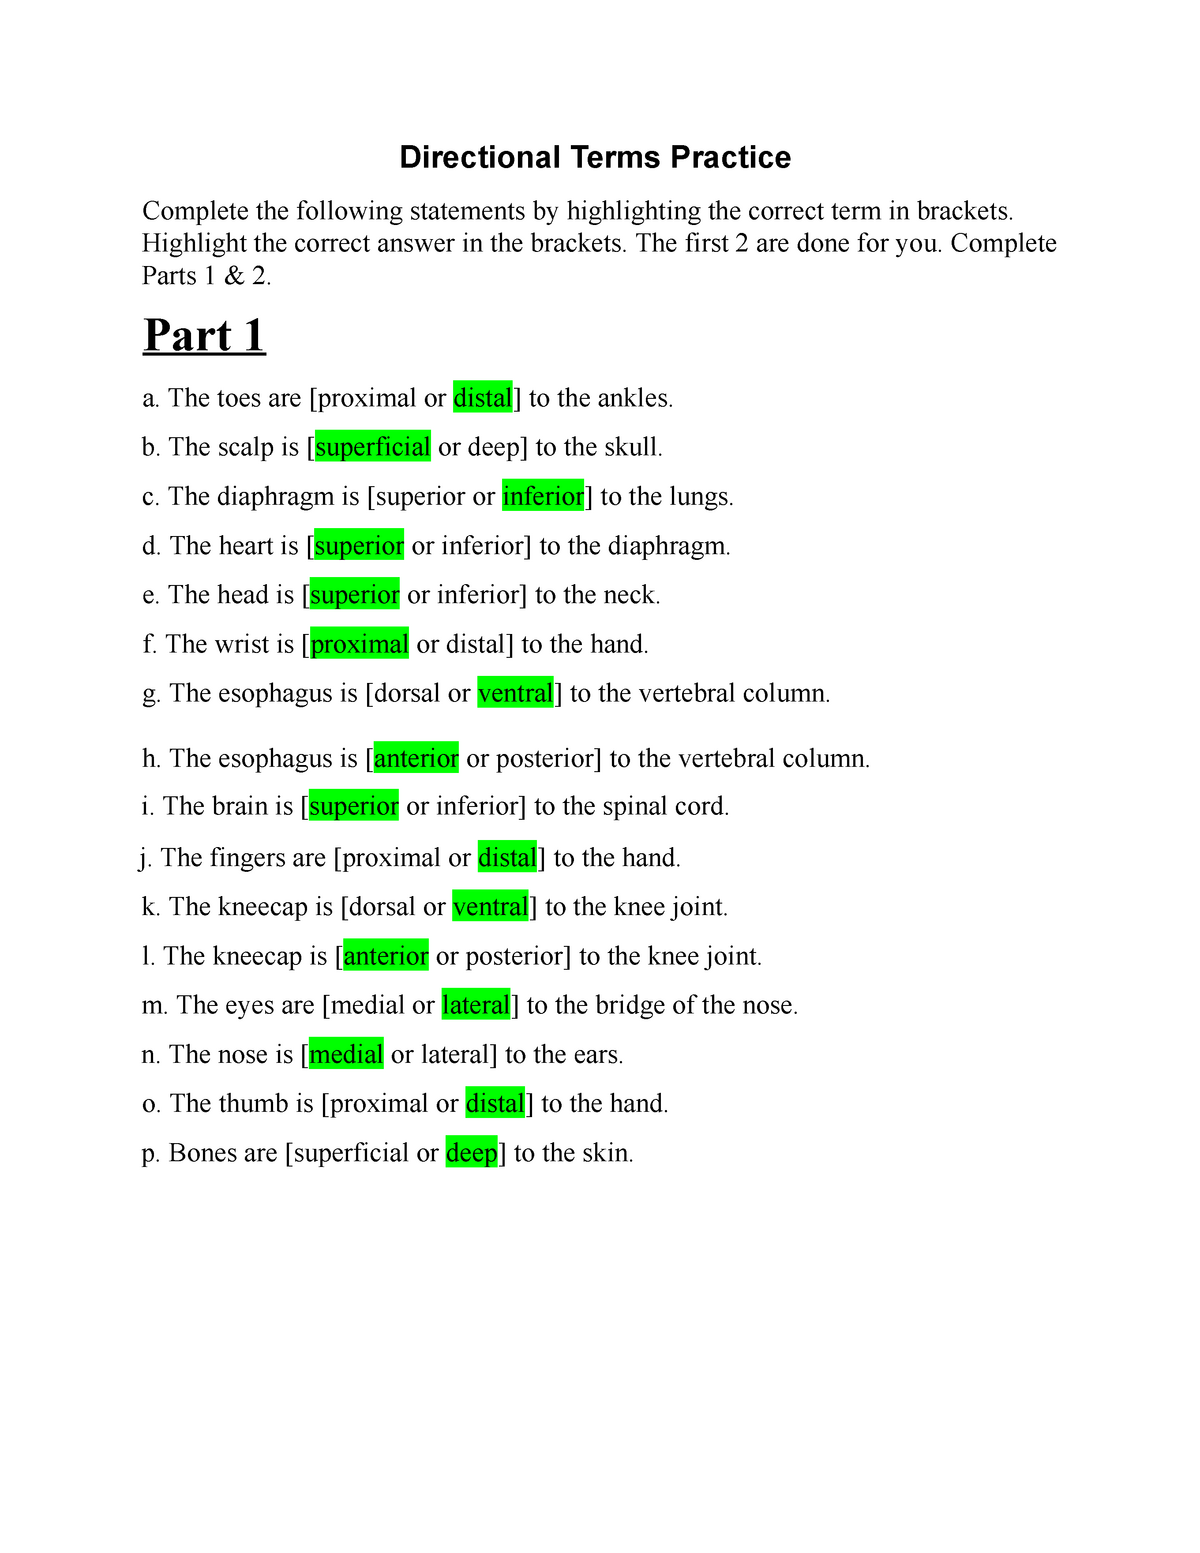 Directional Terms Practice Worksheet Answers